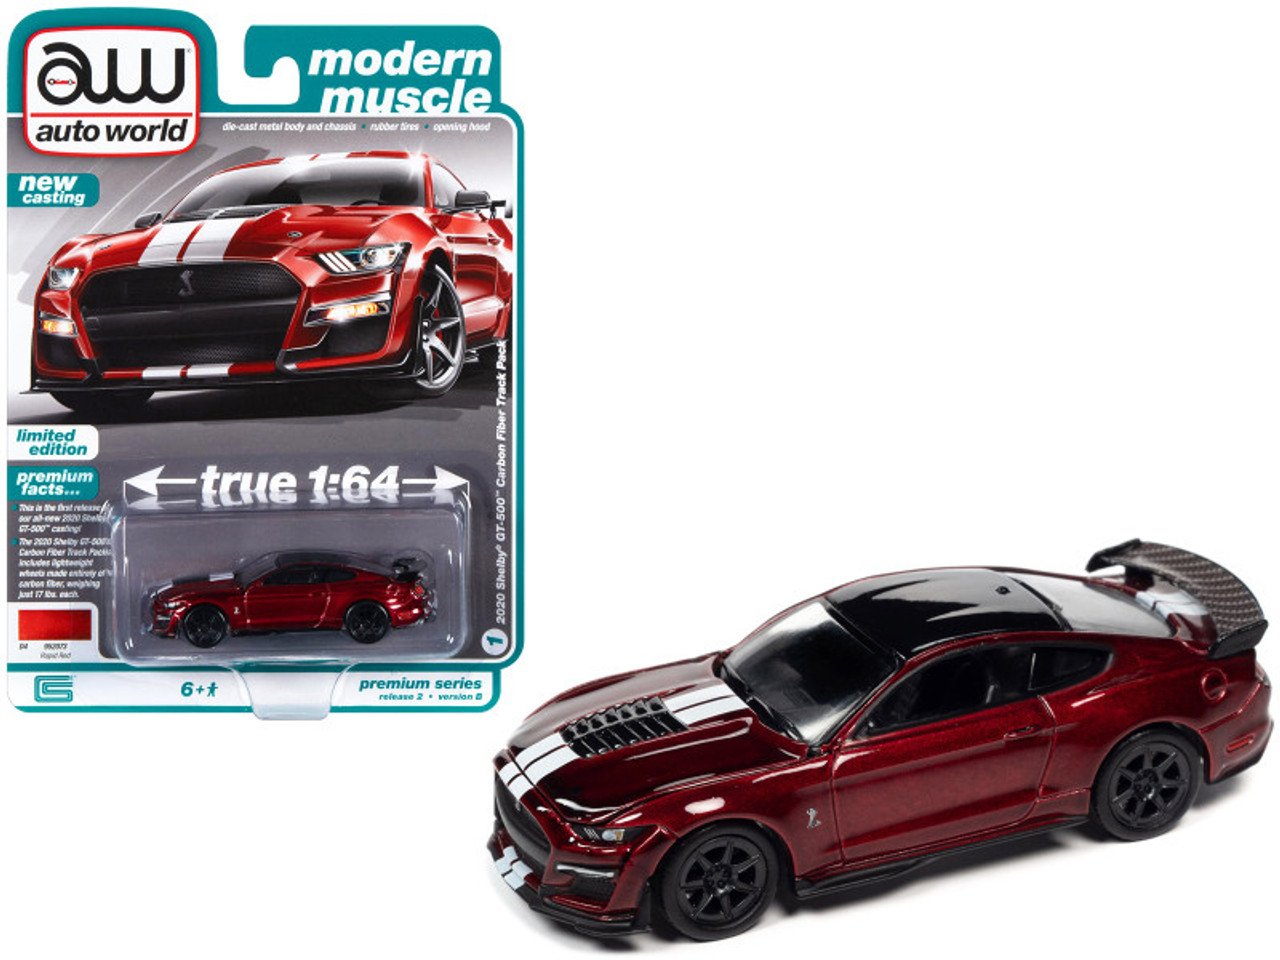 2020 Ford Shelby GT500 Carbon Fiber Track Pack Rapid Red Metallic with White Stripes and Black Top "Modern Muscle" Limited Edition 1/64 Diecast Model Car by Auto World